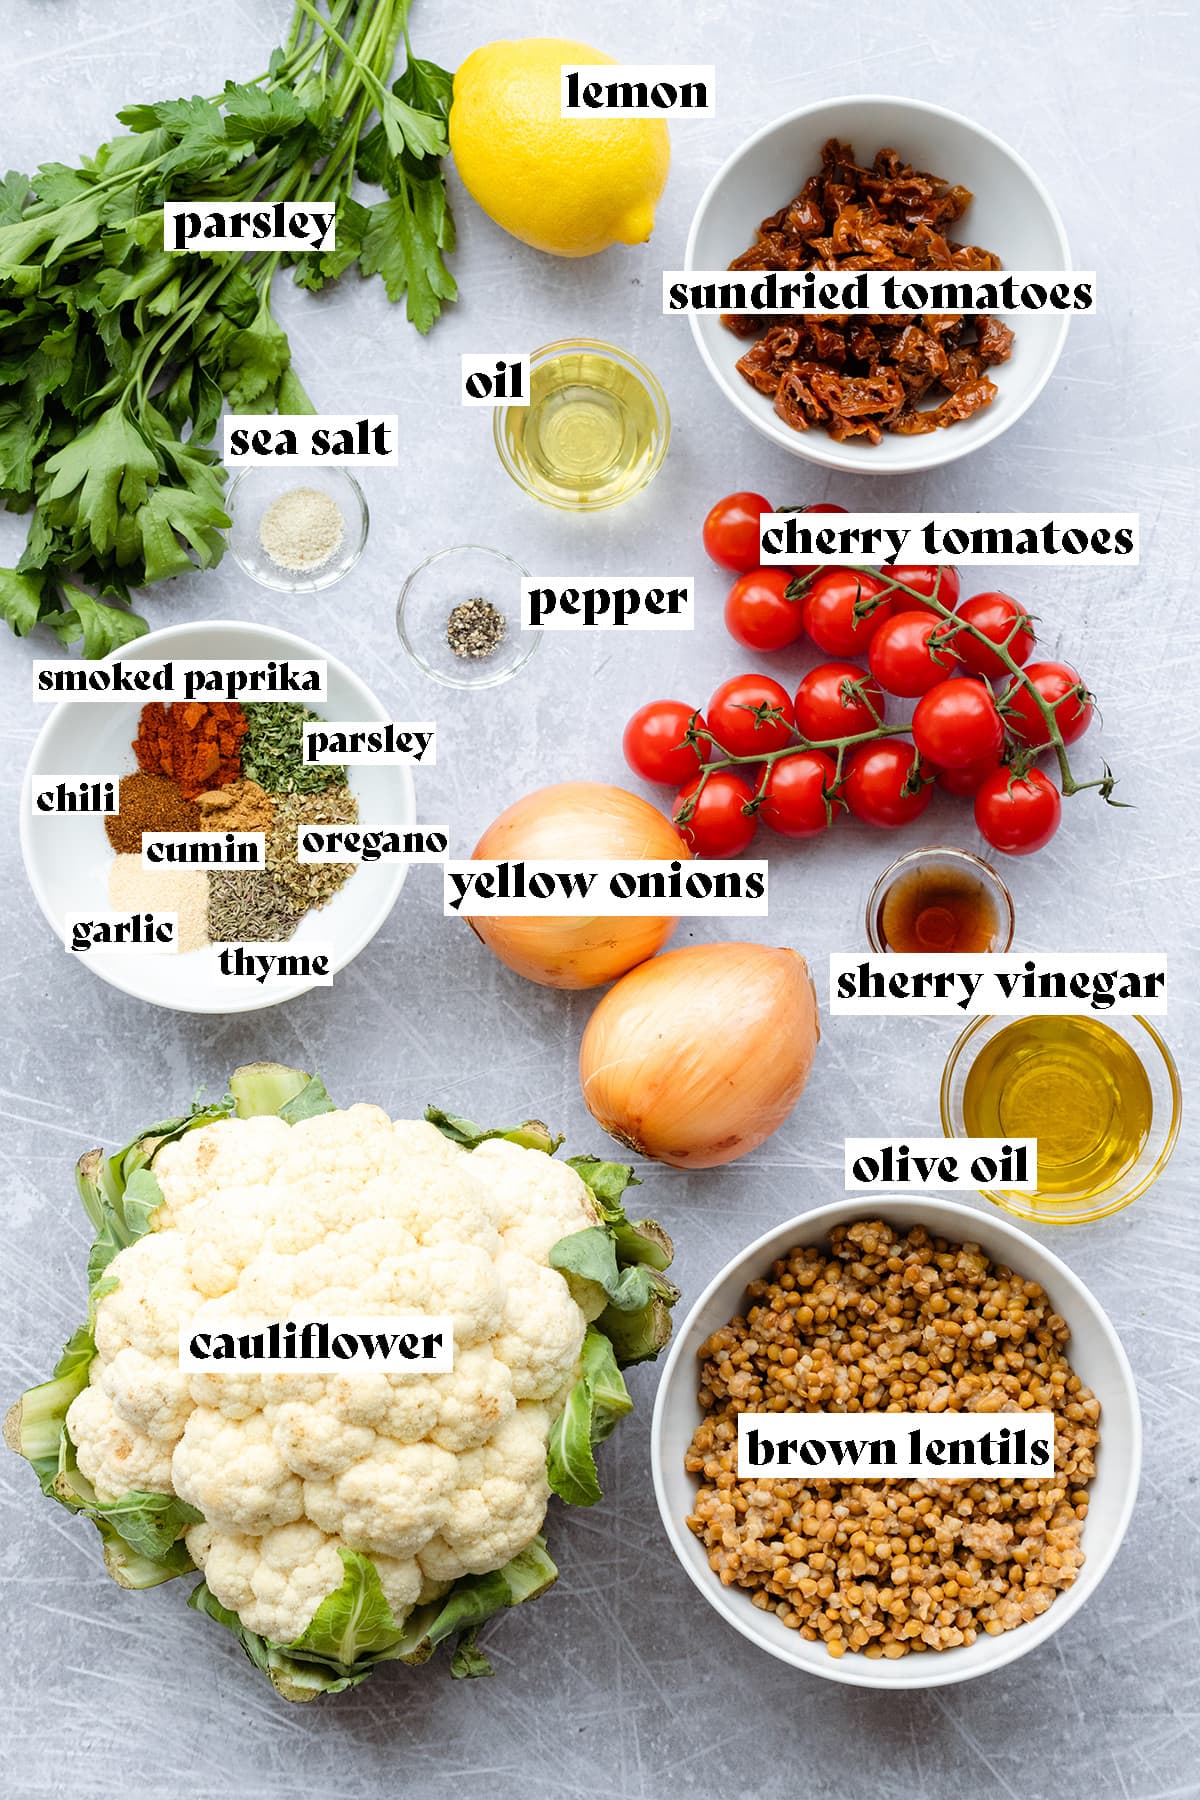 All the ingredients for cauliflower salad laid out on a metal background.